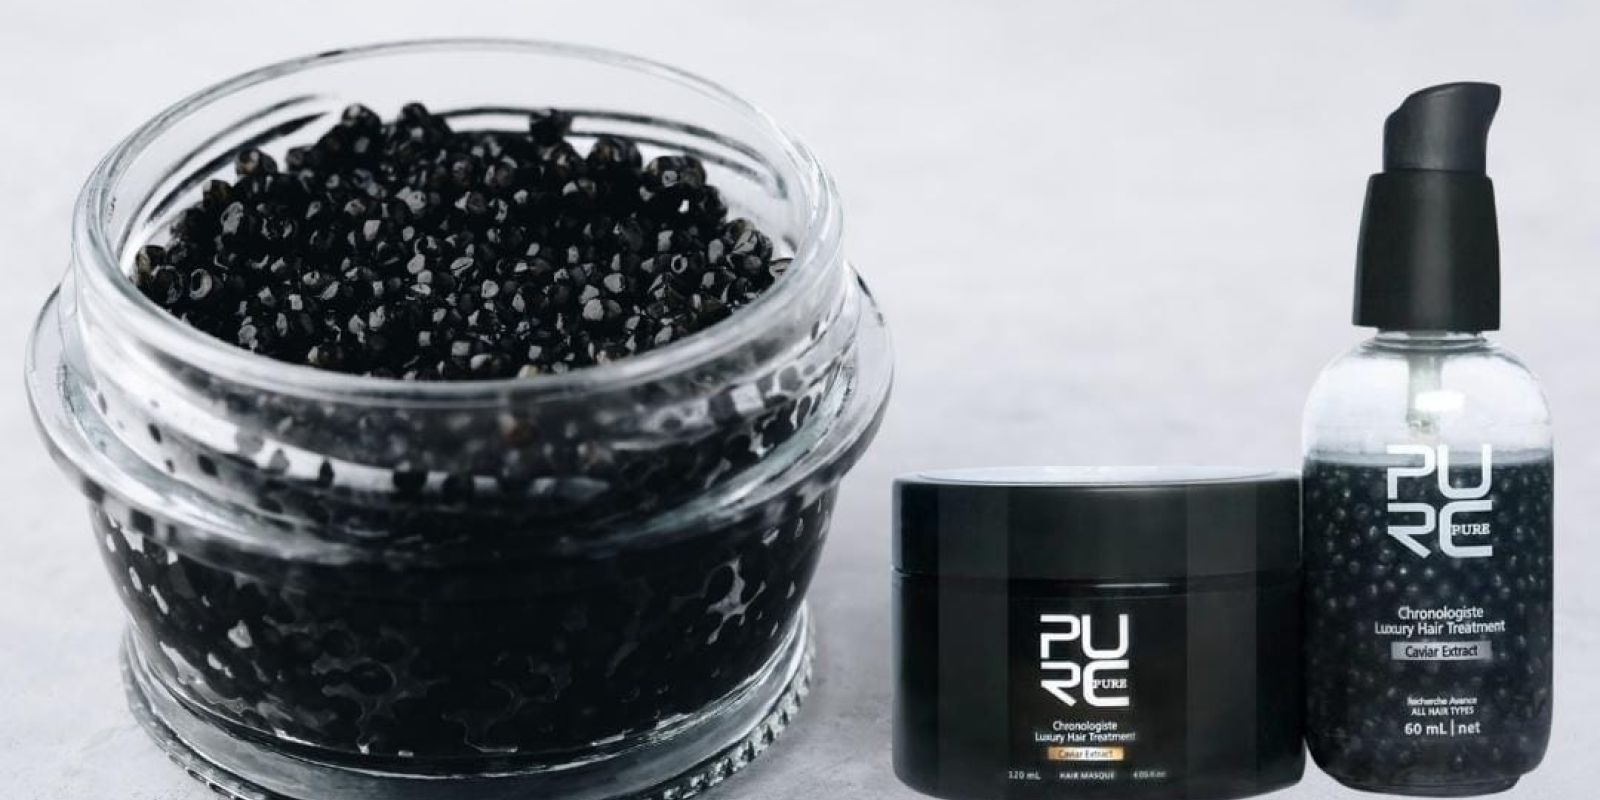 Product Blog: Caviar Extract Hair Treatment Kit admin ajax.php?action=kernel&p=image&src=%7B%22file%22%3A%22wp content%2Fuploads%2F2023%2F04%2FWhatsApp Image 2023 05 16 at 10.40.41